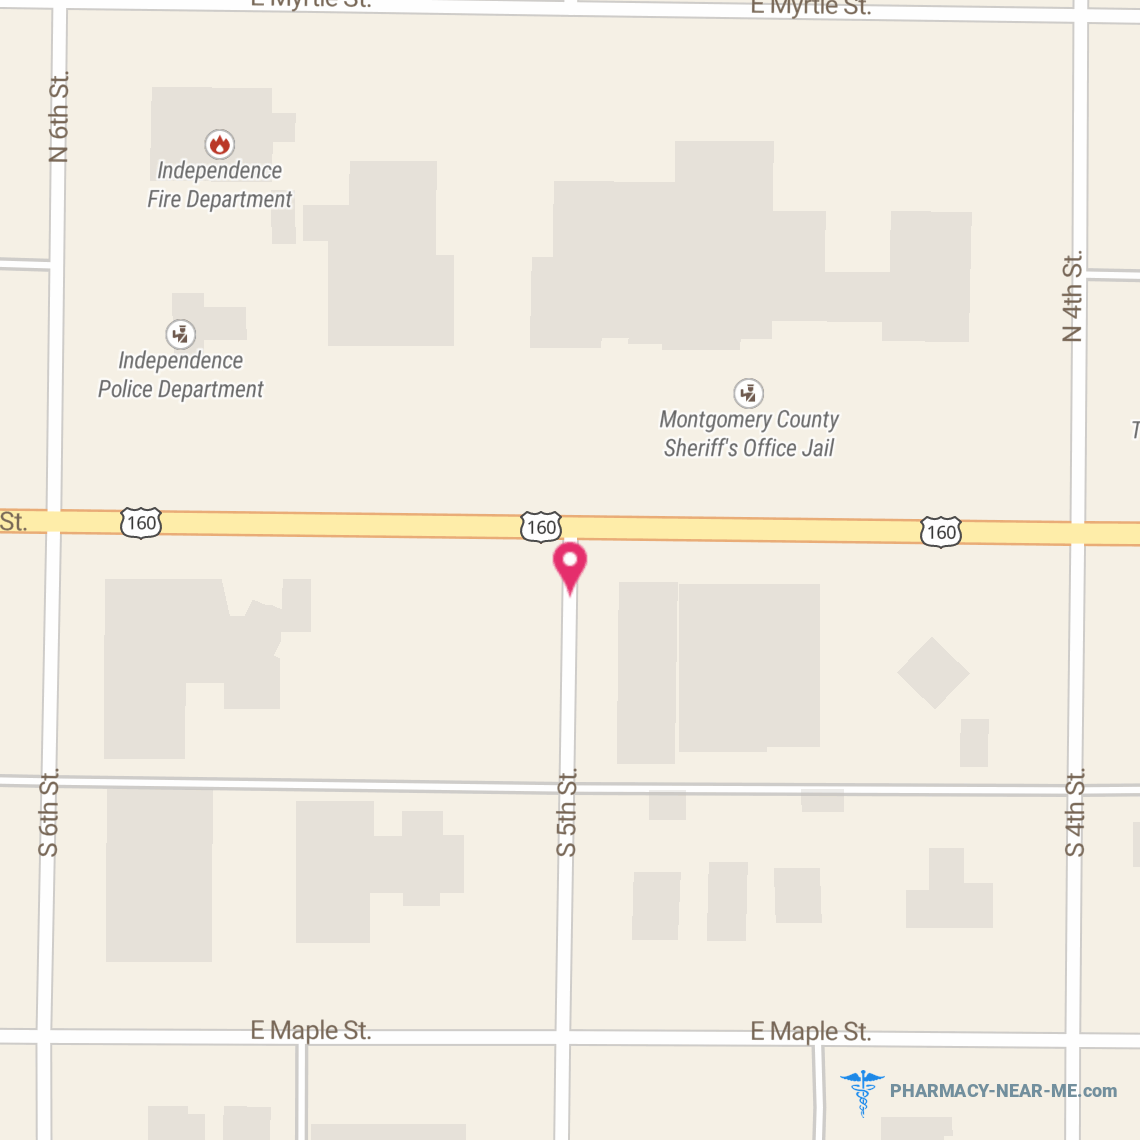 WALGREENS #09454 - Pharmacy Hours, Phone, Reviews & Information: 301 West Main Street, Independence, Kansas 67301, United States